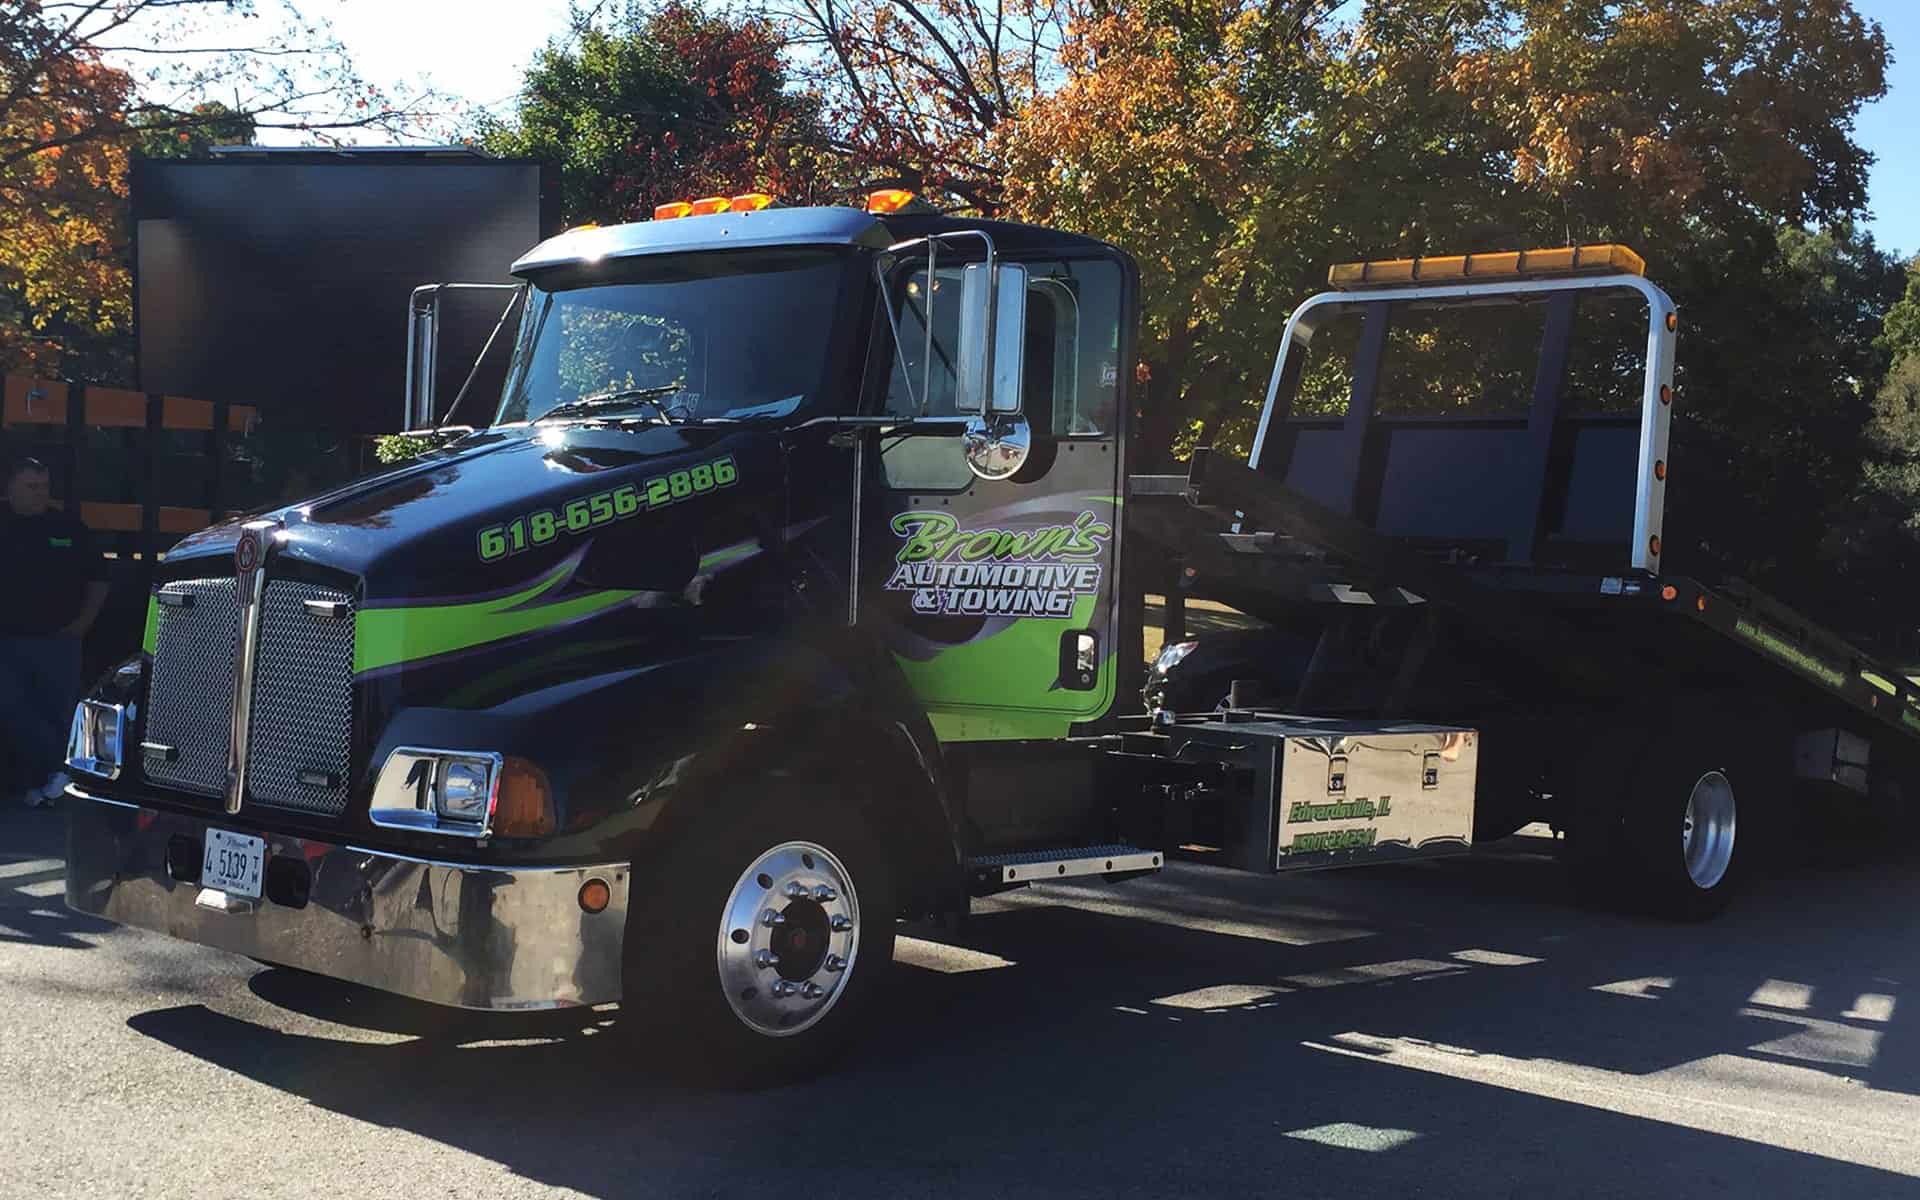 Brown's Automotive & Towing - Large Flat Bed Company tow truck - Edwardsville, IL